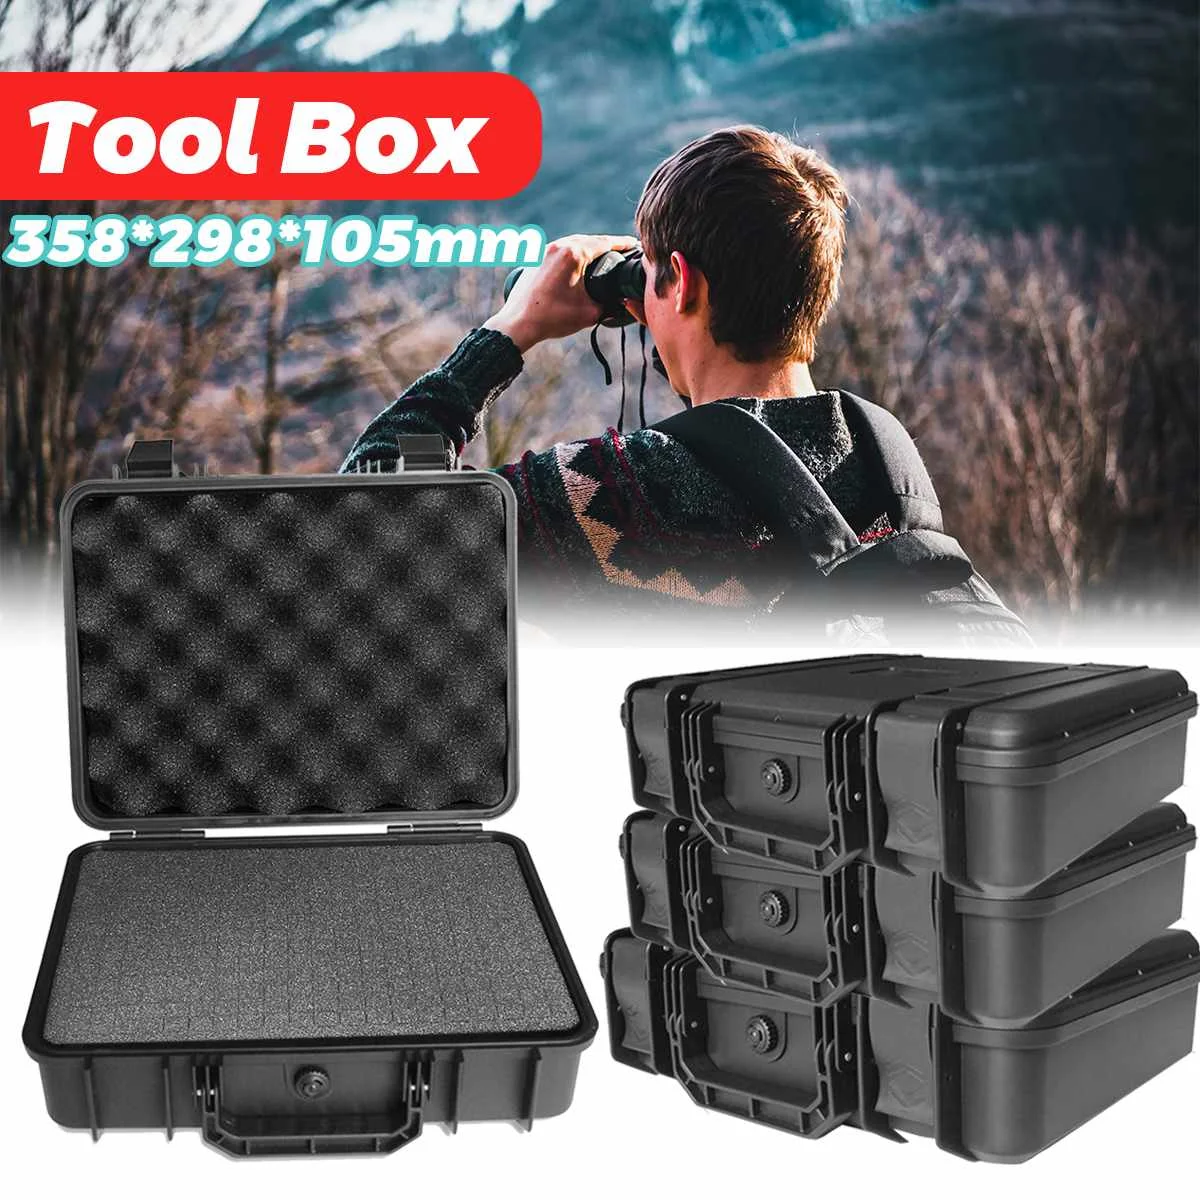 

Waterproof Shockproof Tool Case Sealed Tool Box Safety Resistant Camera Photography Multimeter Storage Box Suitcase With Sponge